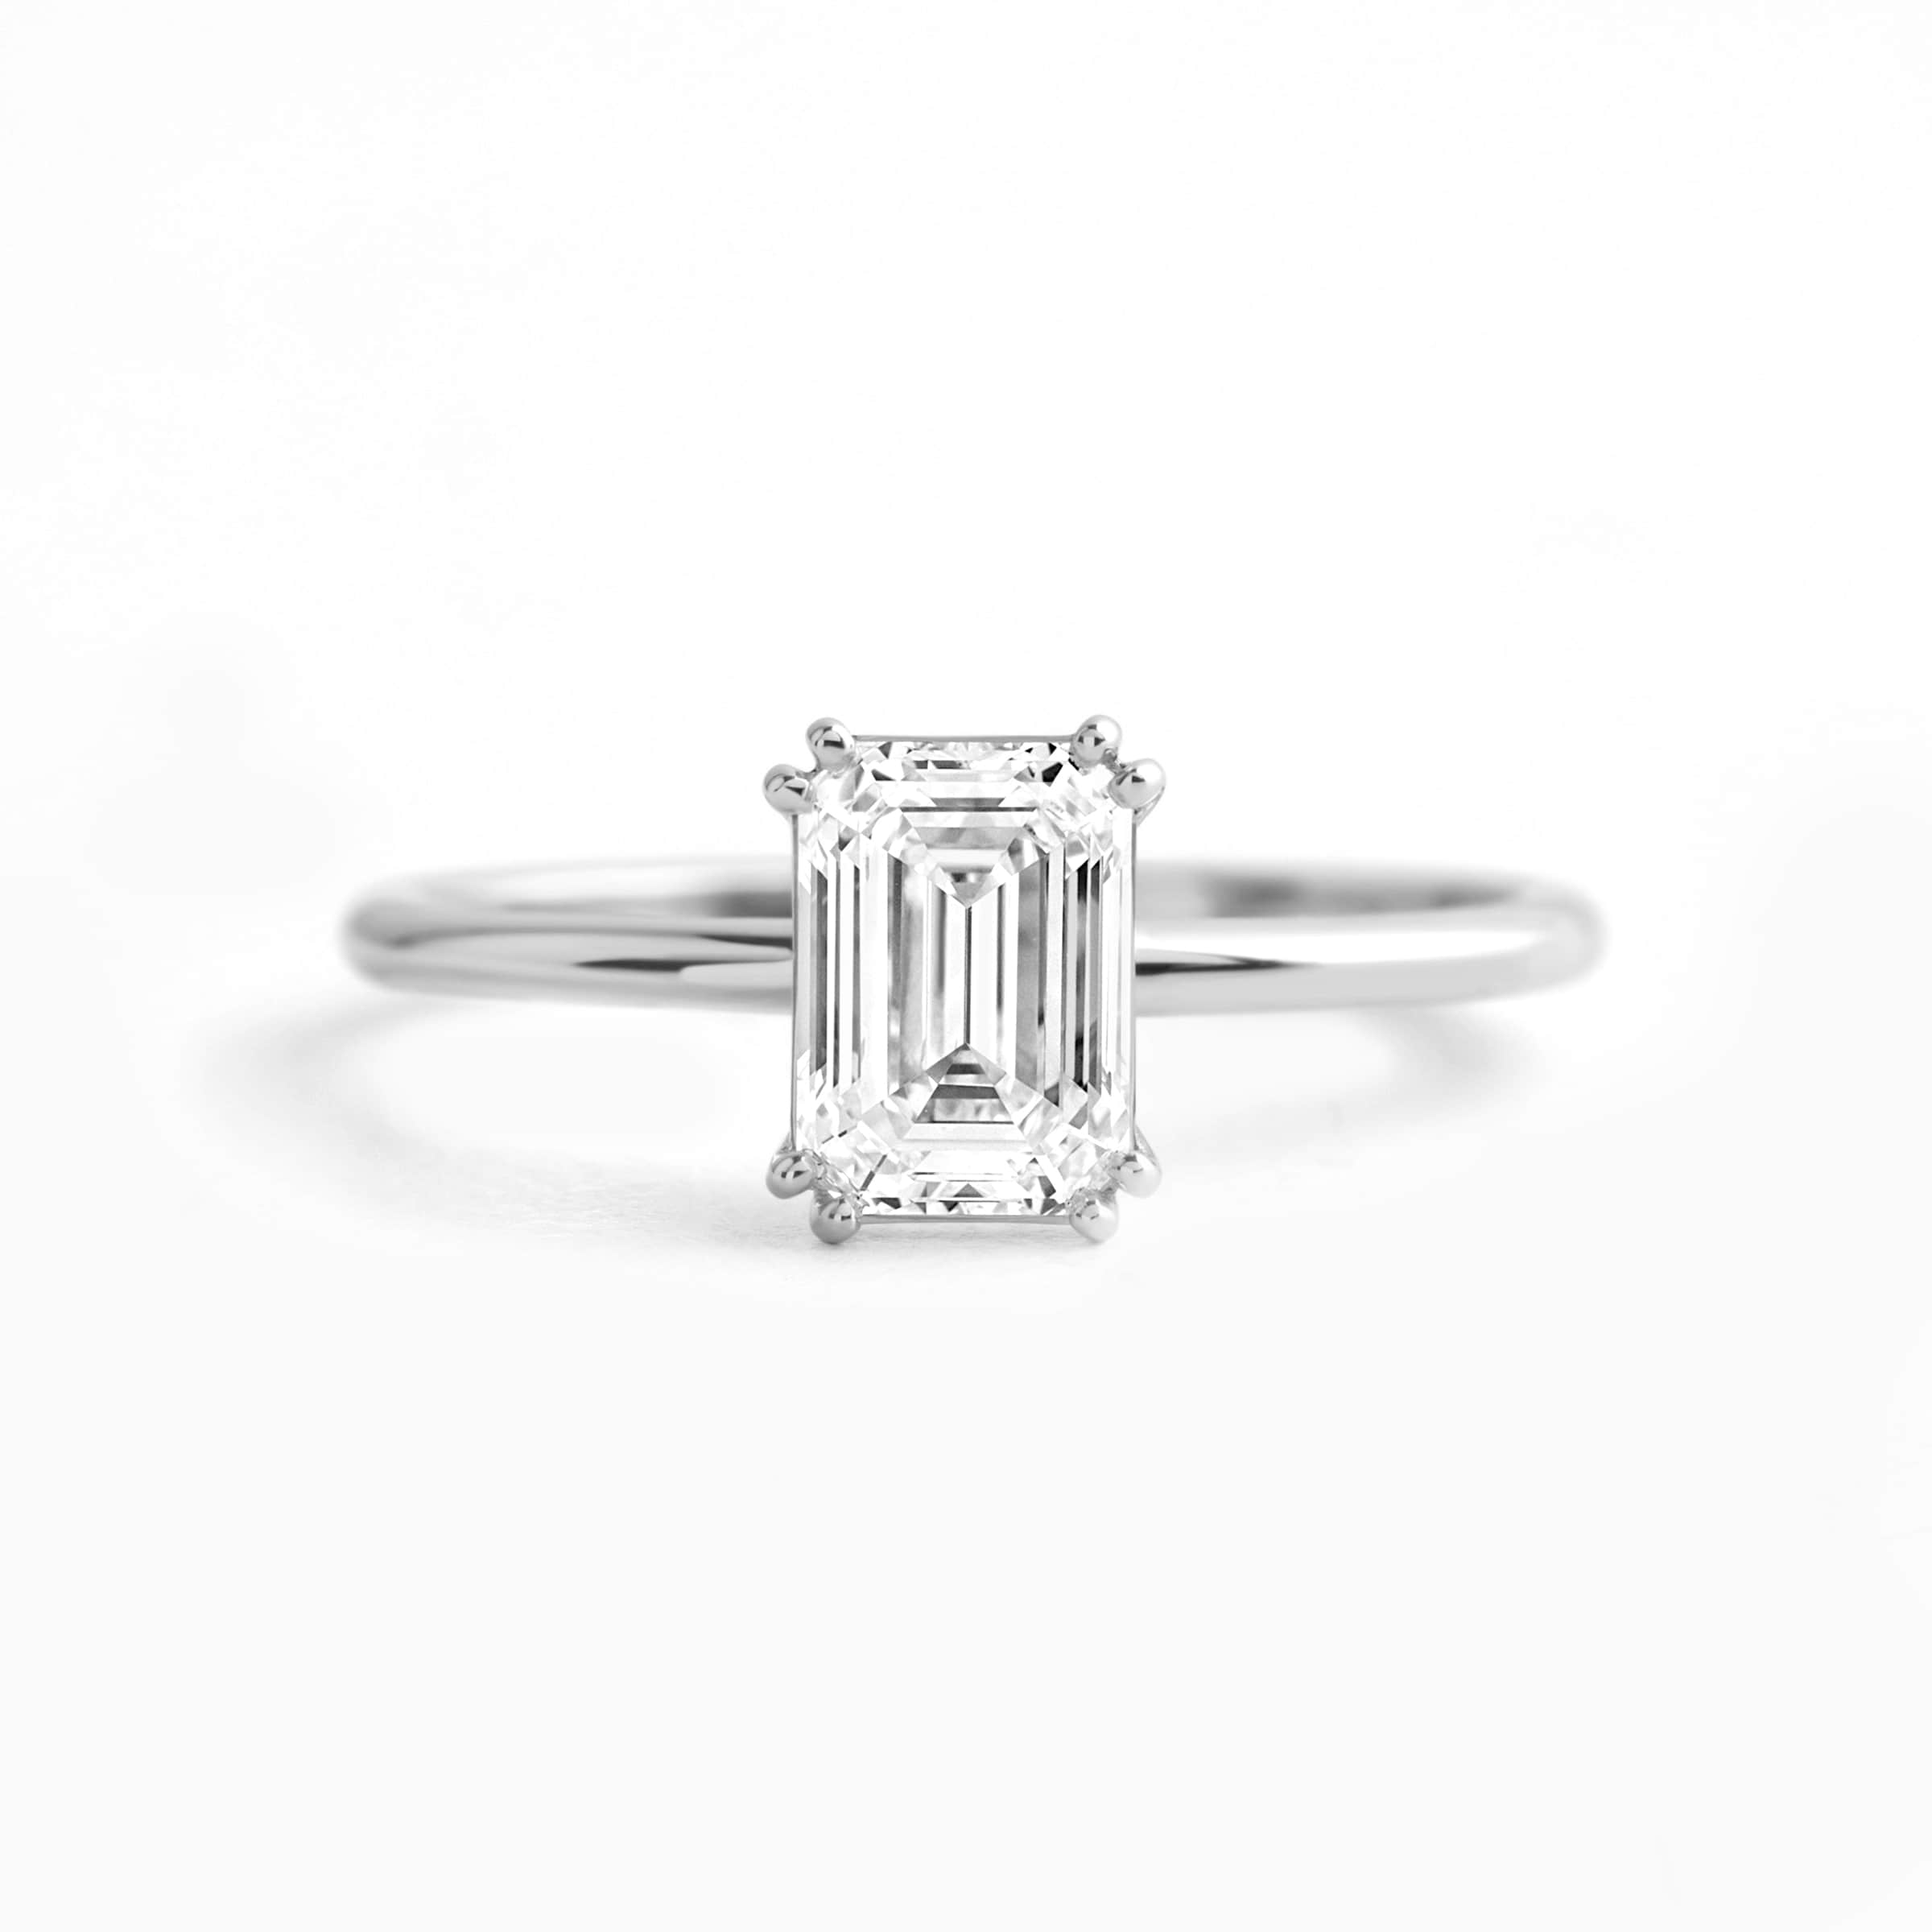 Darry Ring emerald cut engagement ring white gold